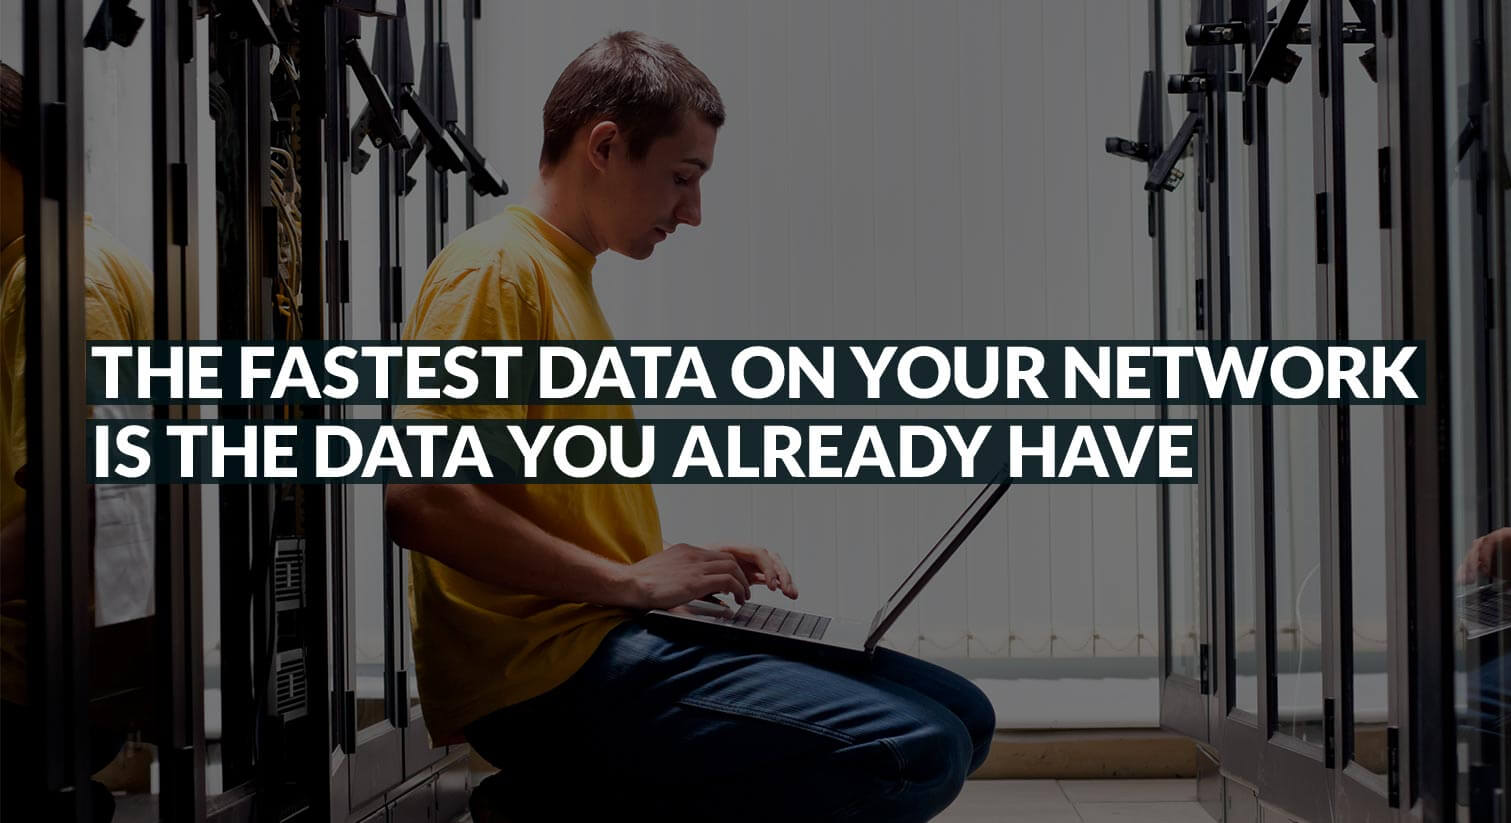 The fastest data on your network is the data you already have